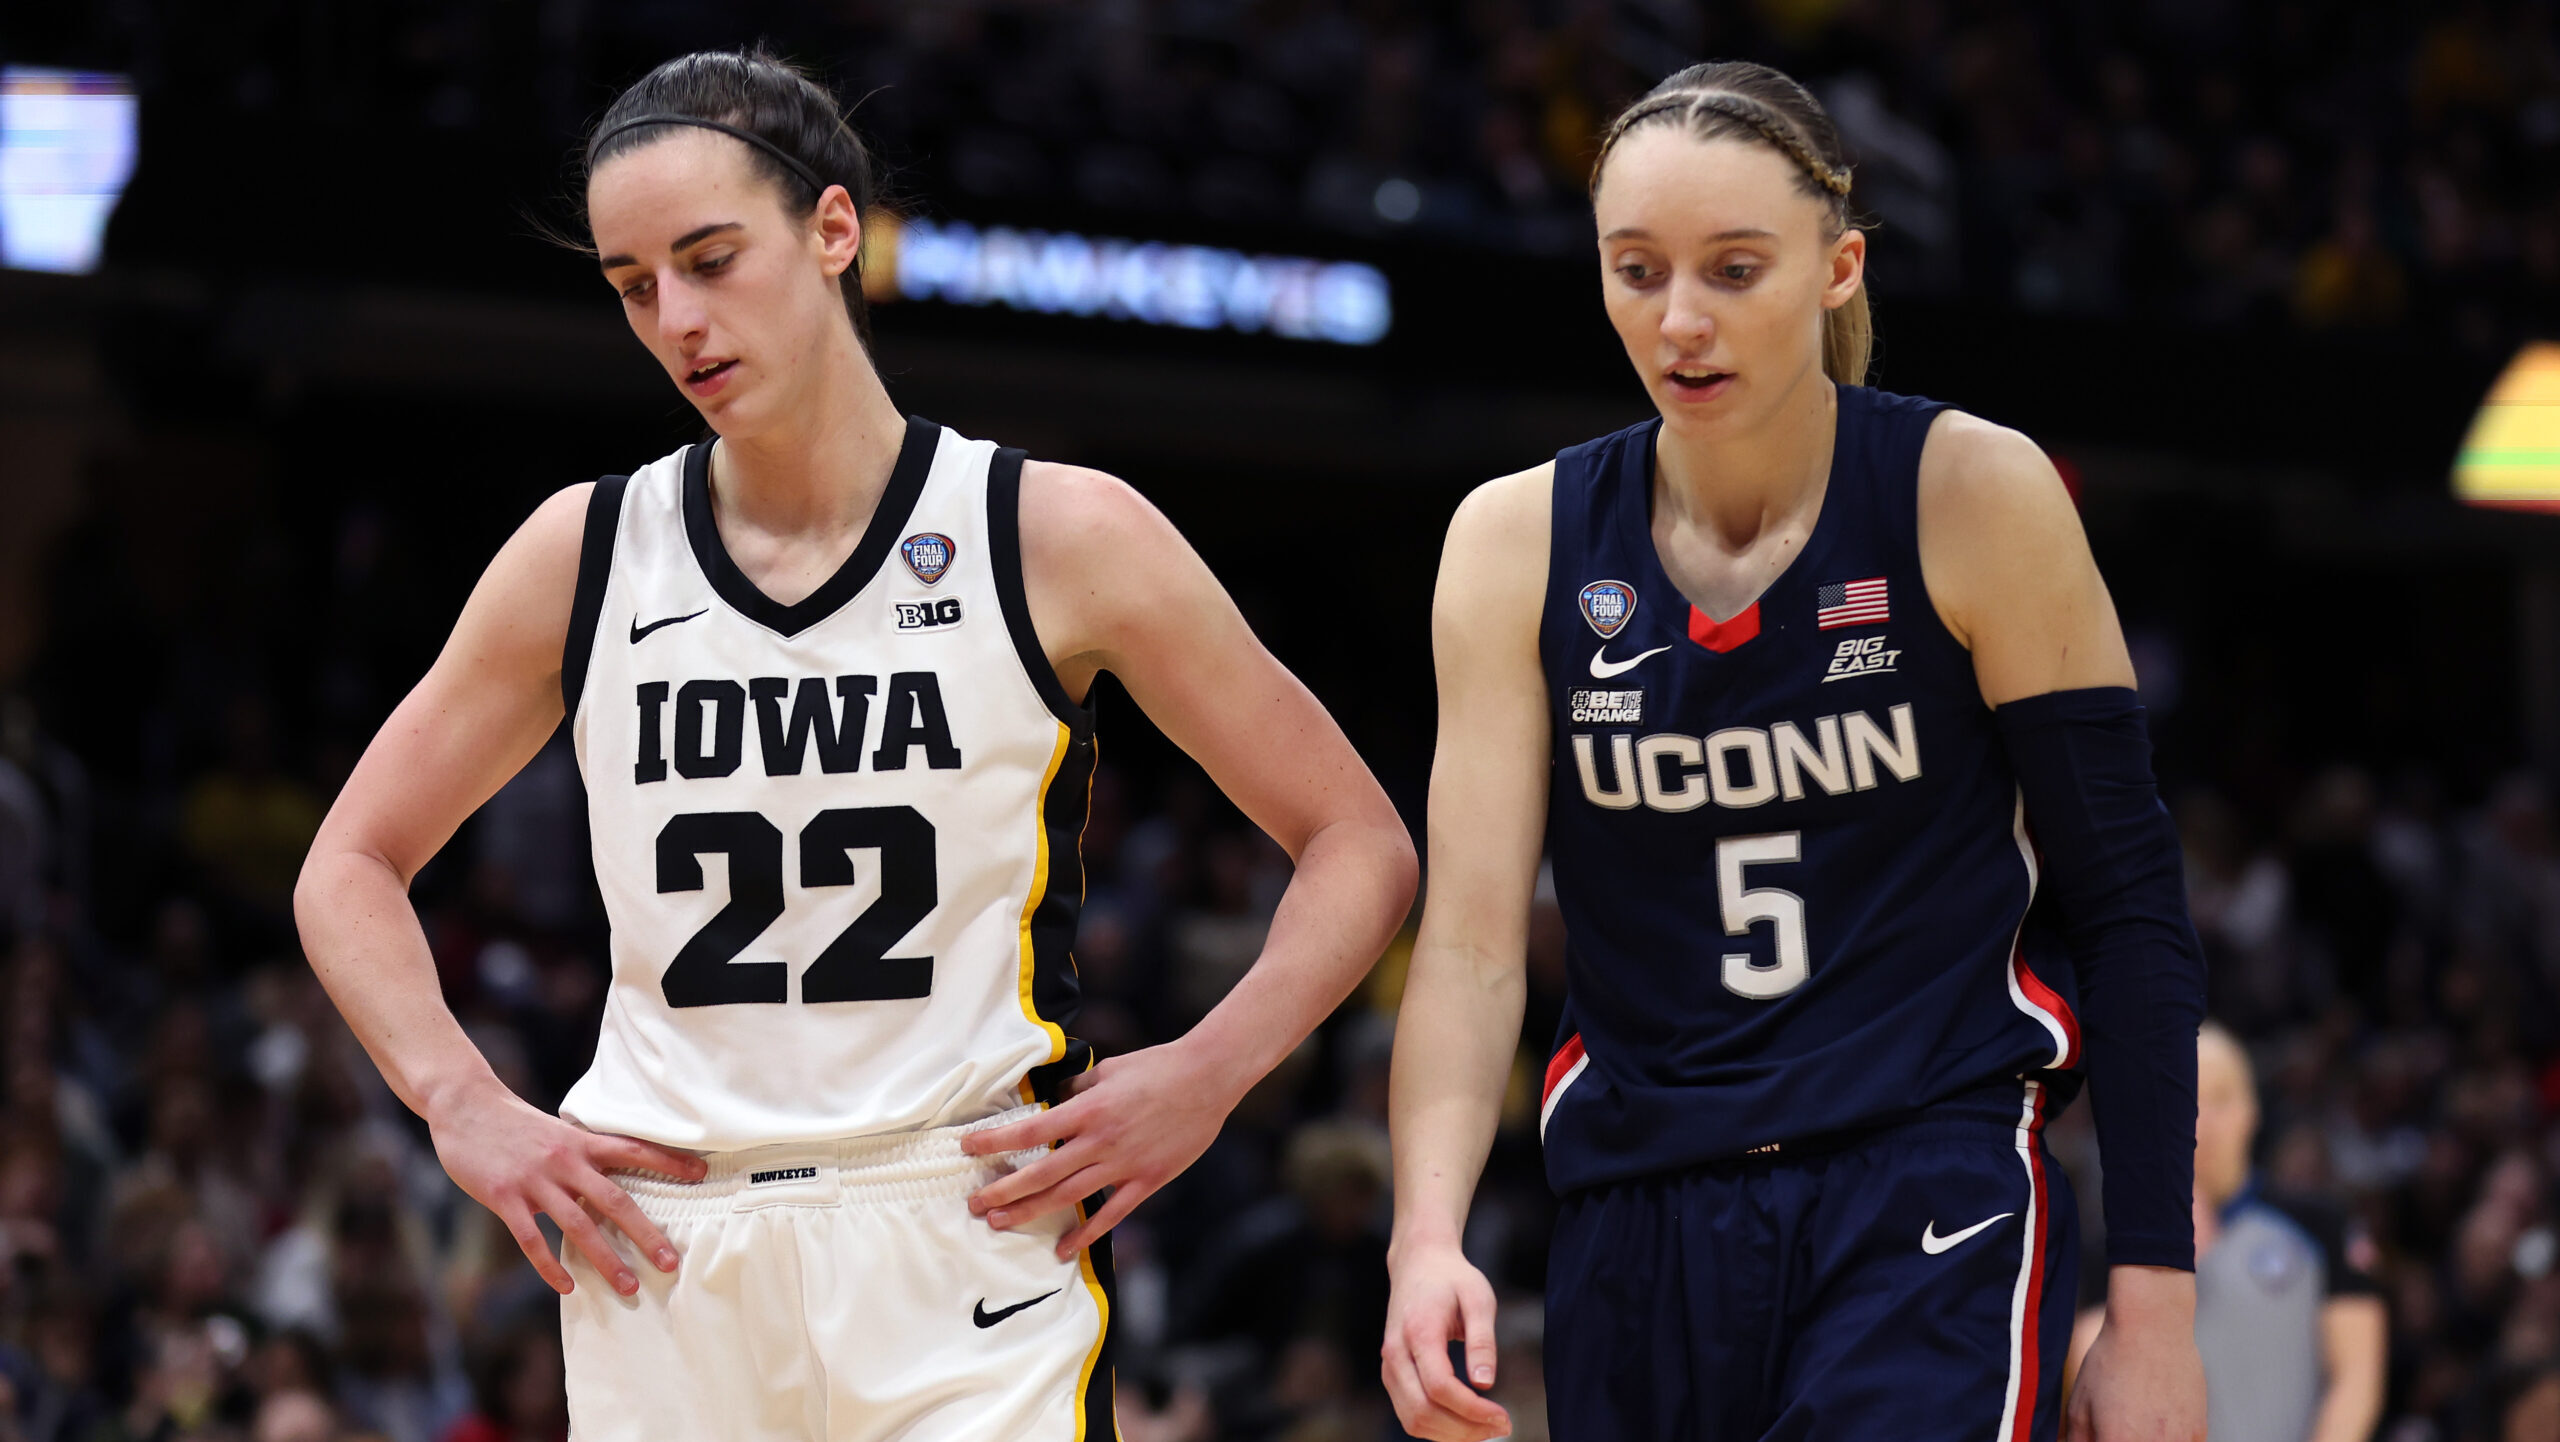 Caitlin Clark Leads Iowa To 71-69 Win Over UConn In Women's Final Four